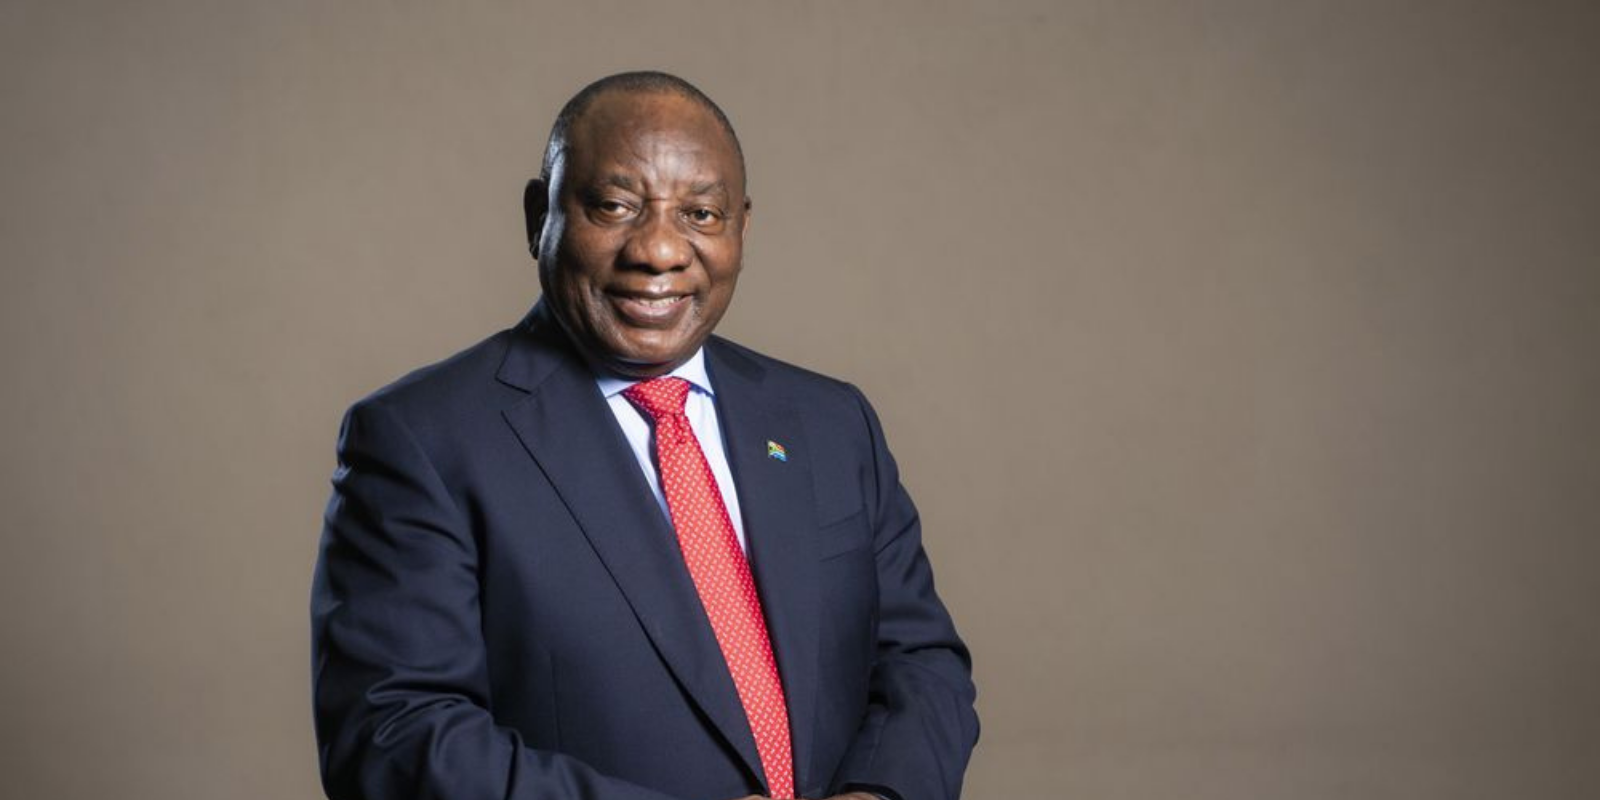 Cyril Ramaphosa is the president of which country?